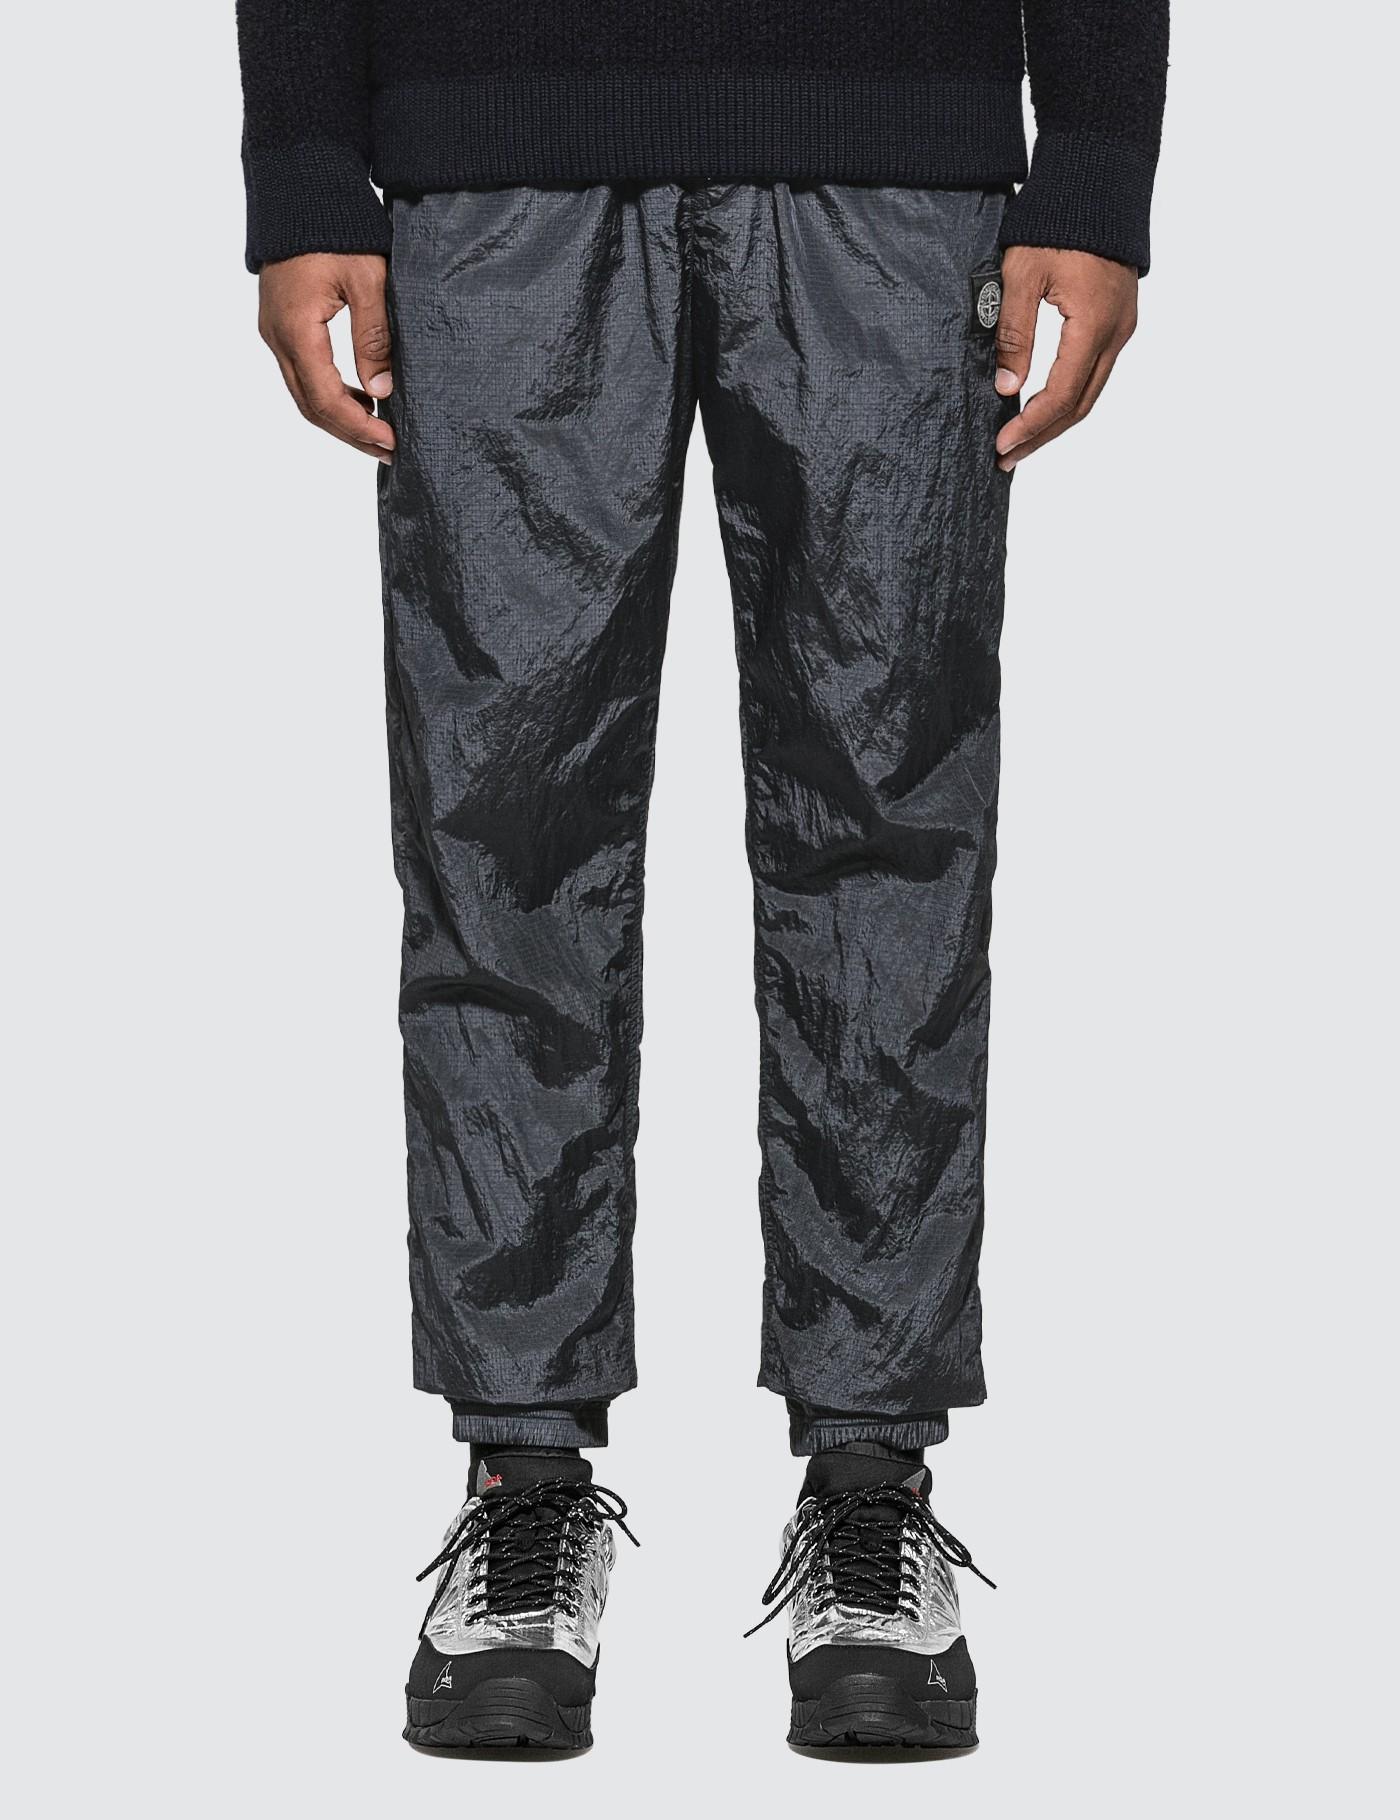 Stone Island Synthetic Patch Nylon Pants in Blue for Men - Lyst